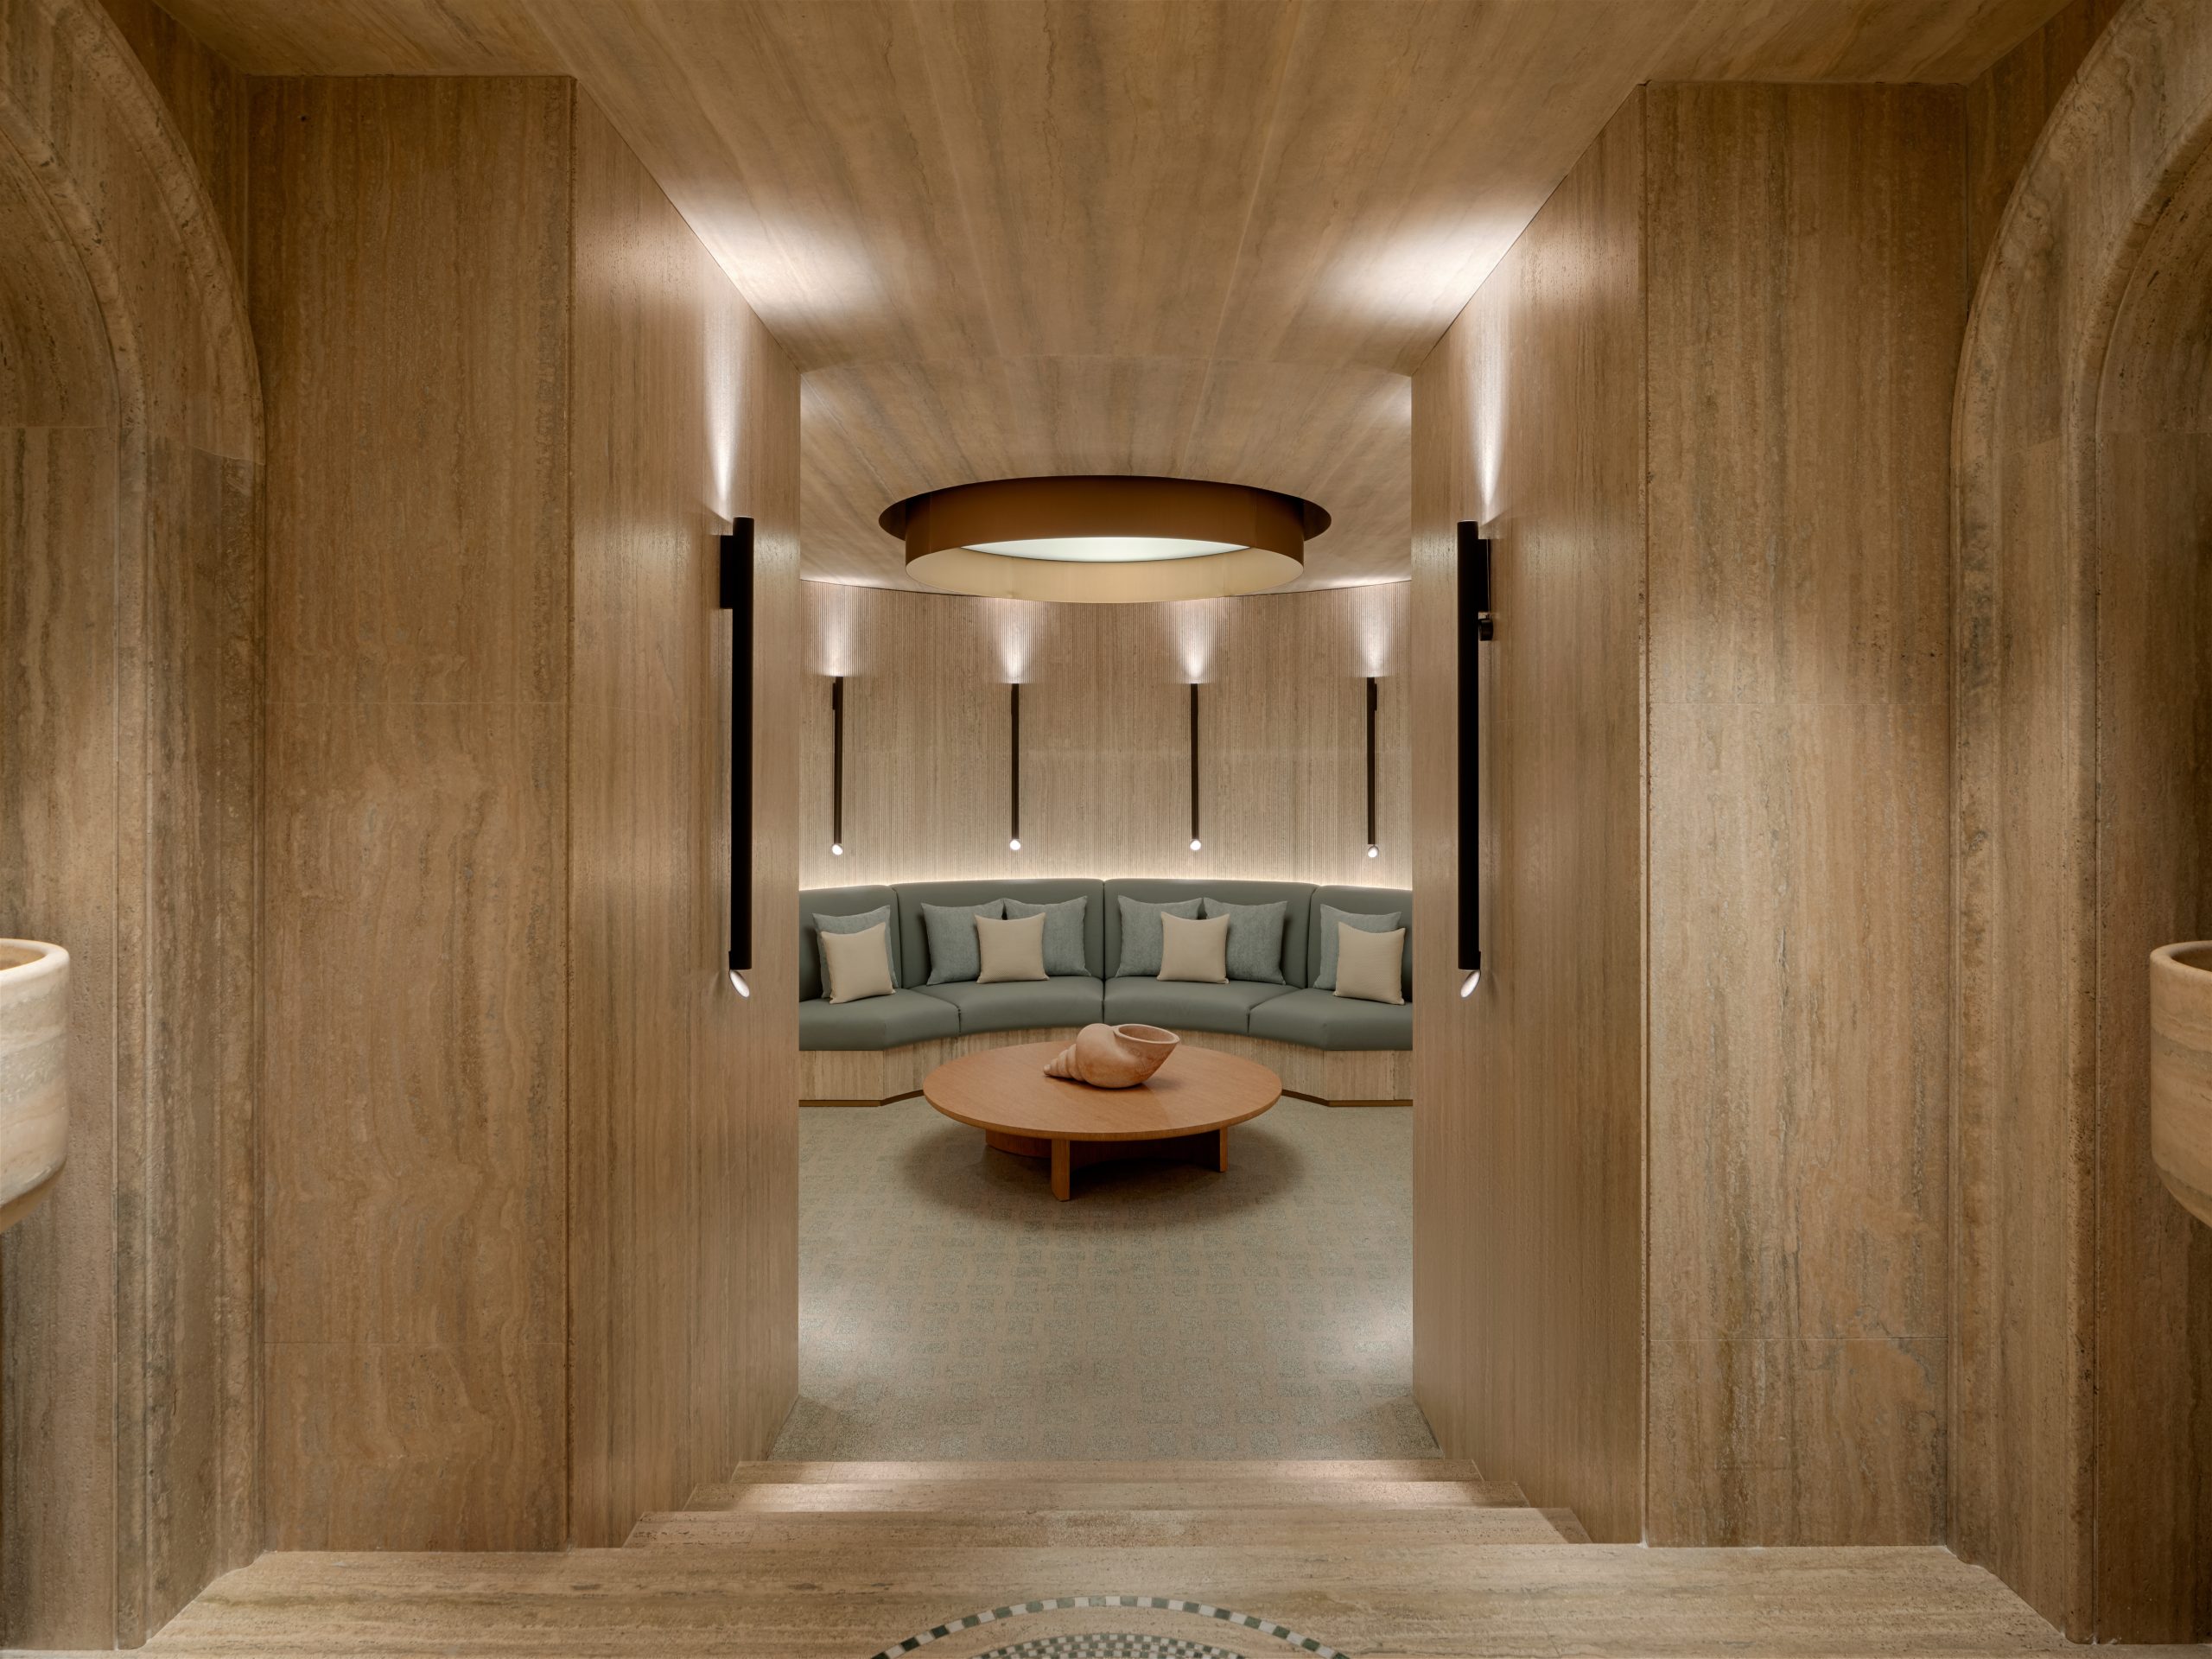 Spa of the Month: Six Senses, Rome